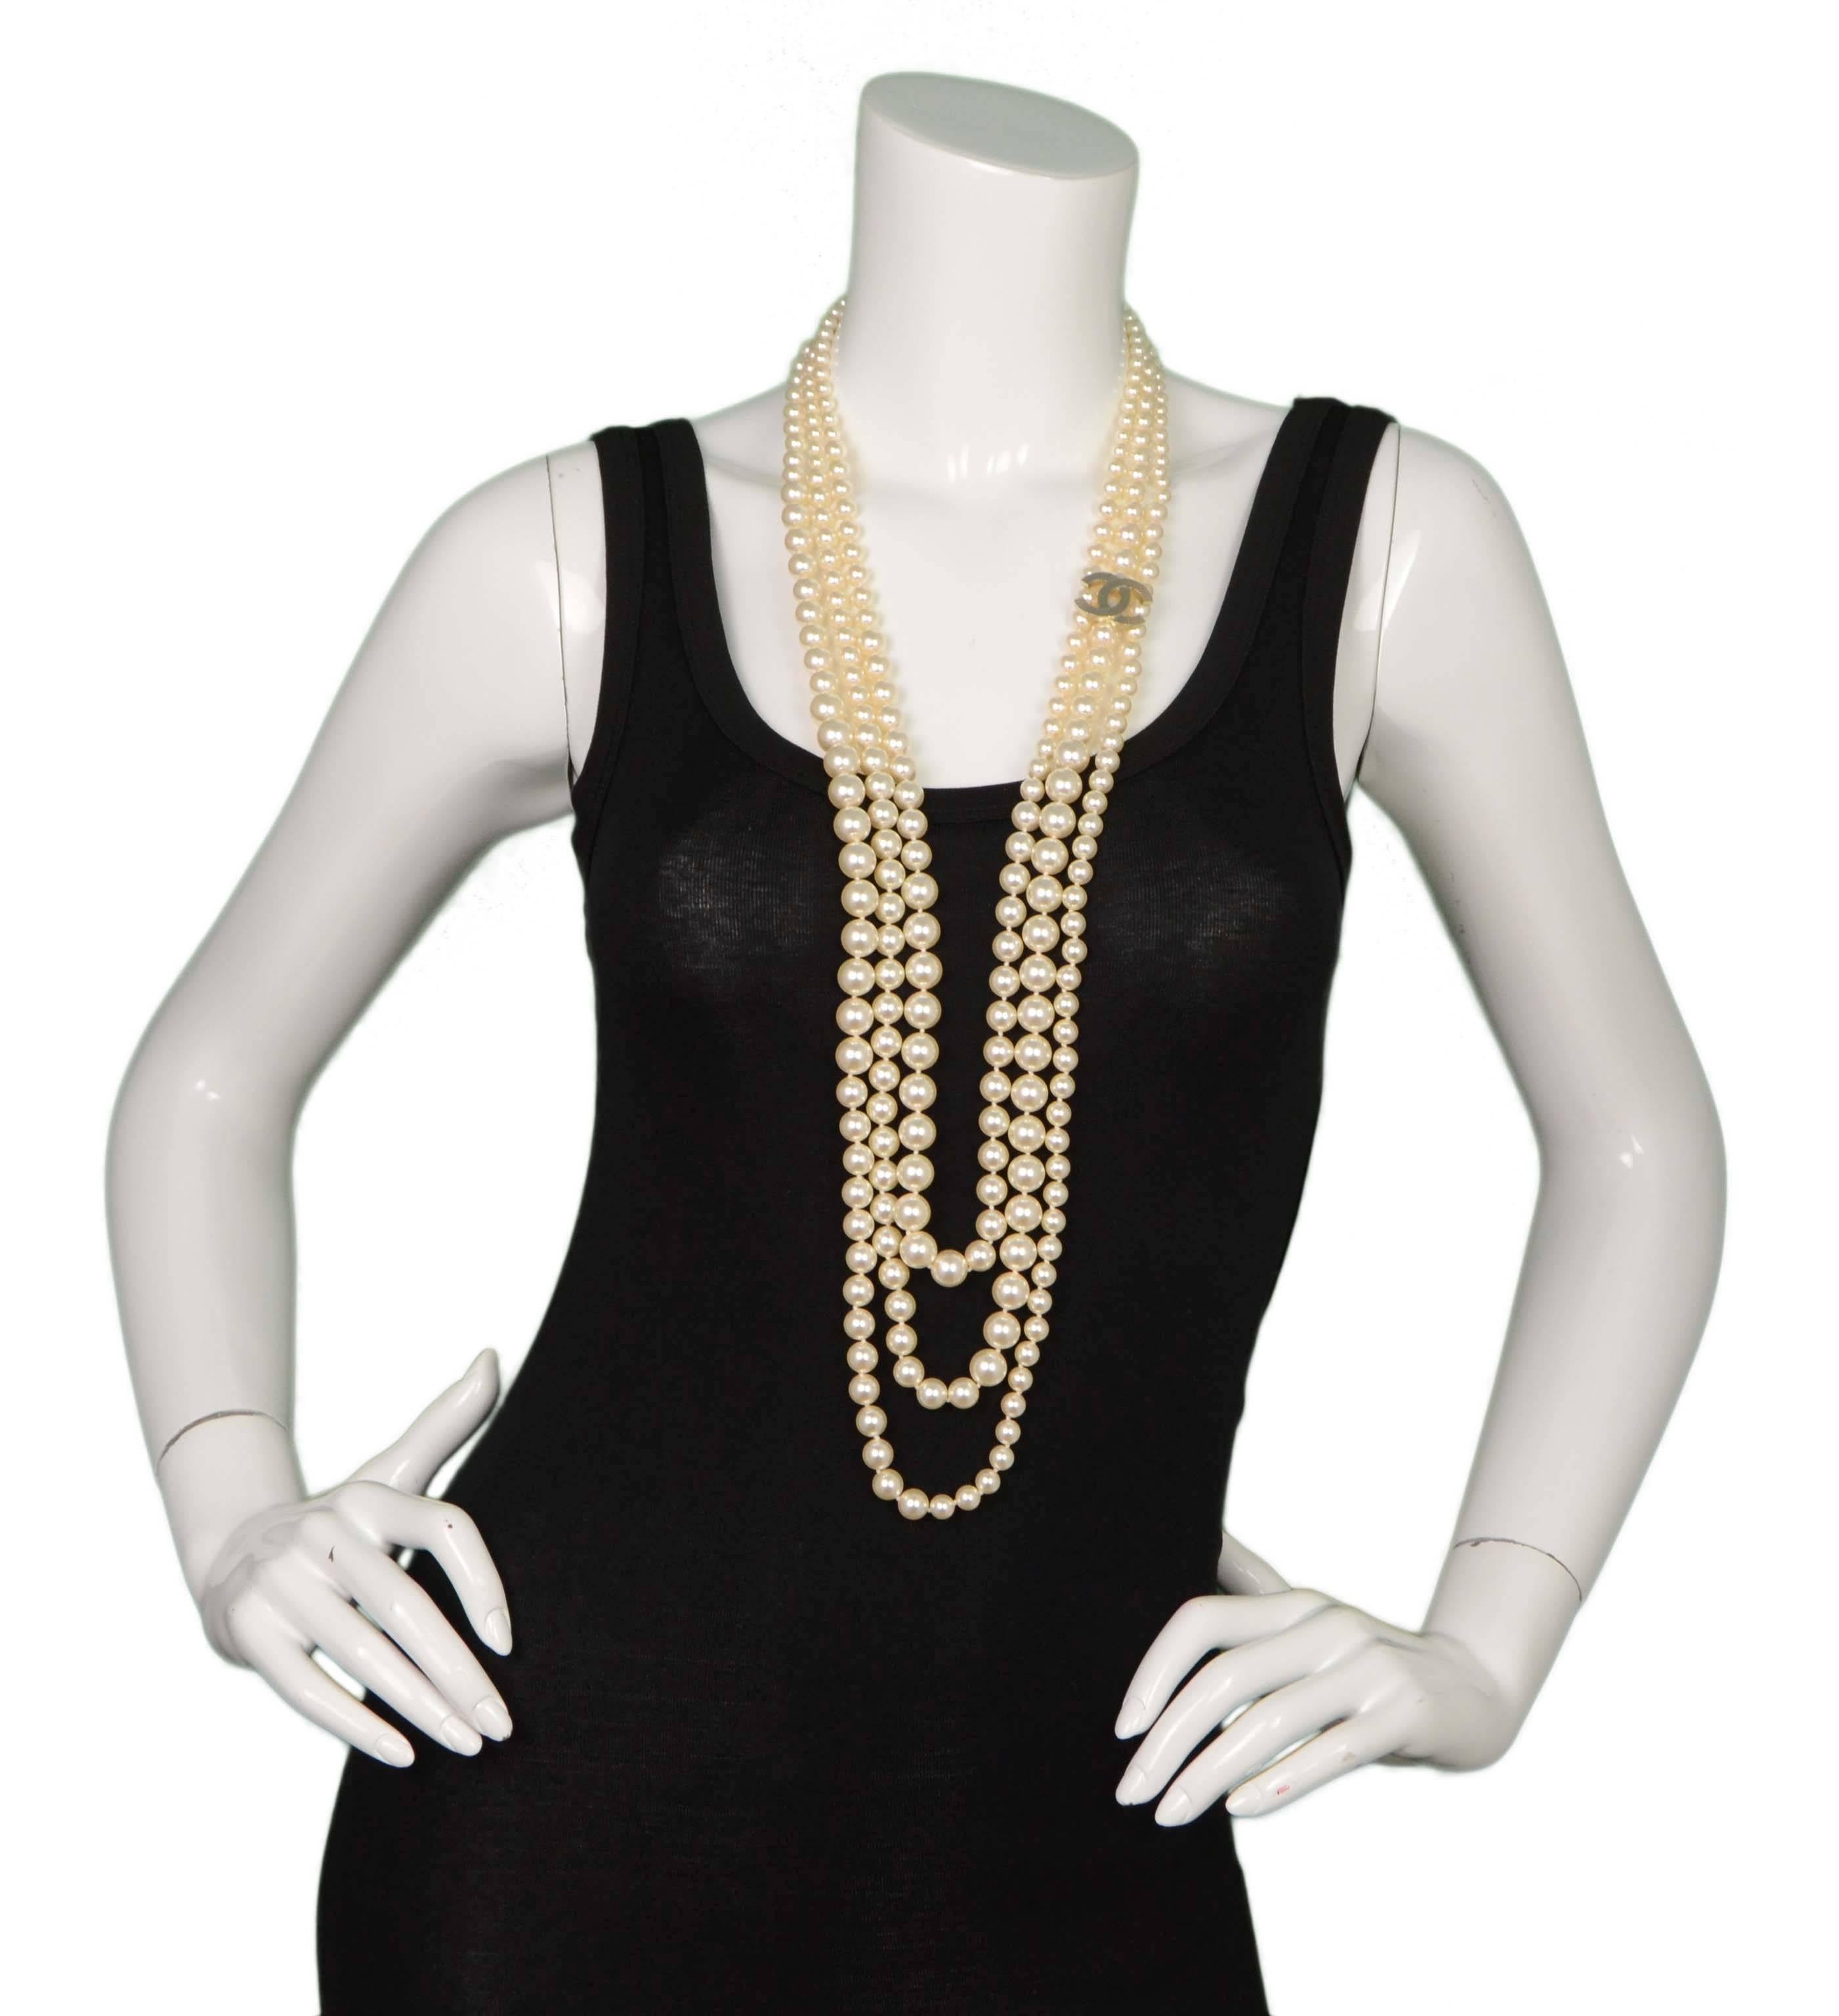 Women's Chanel Three-Strand Graduated Pearl Necklace